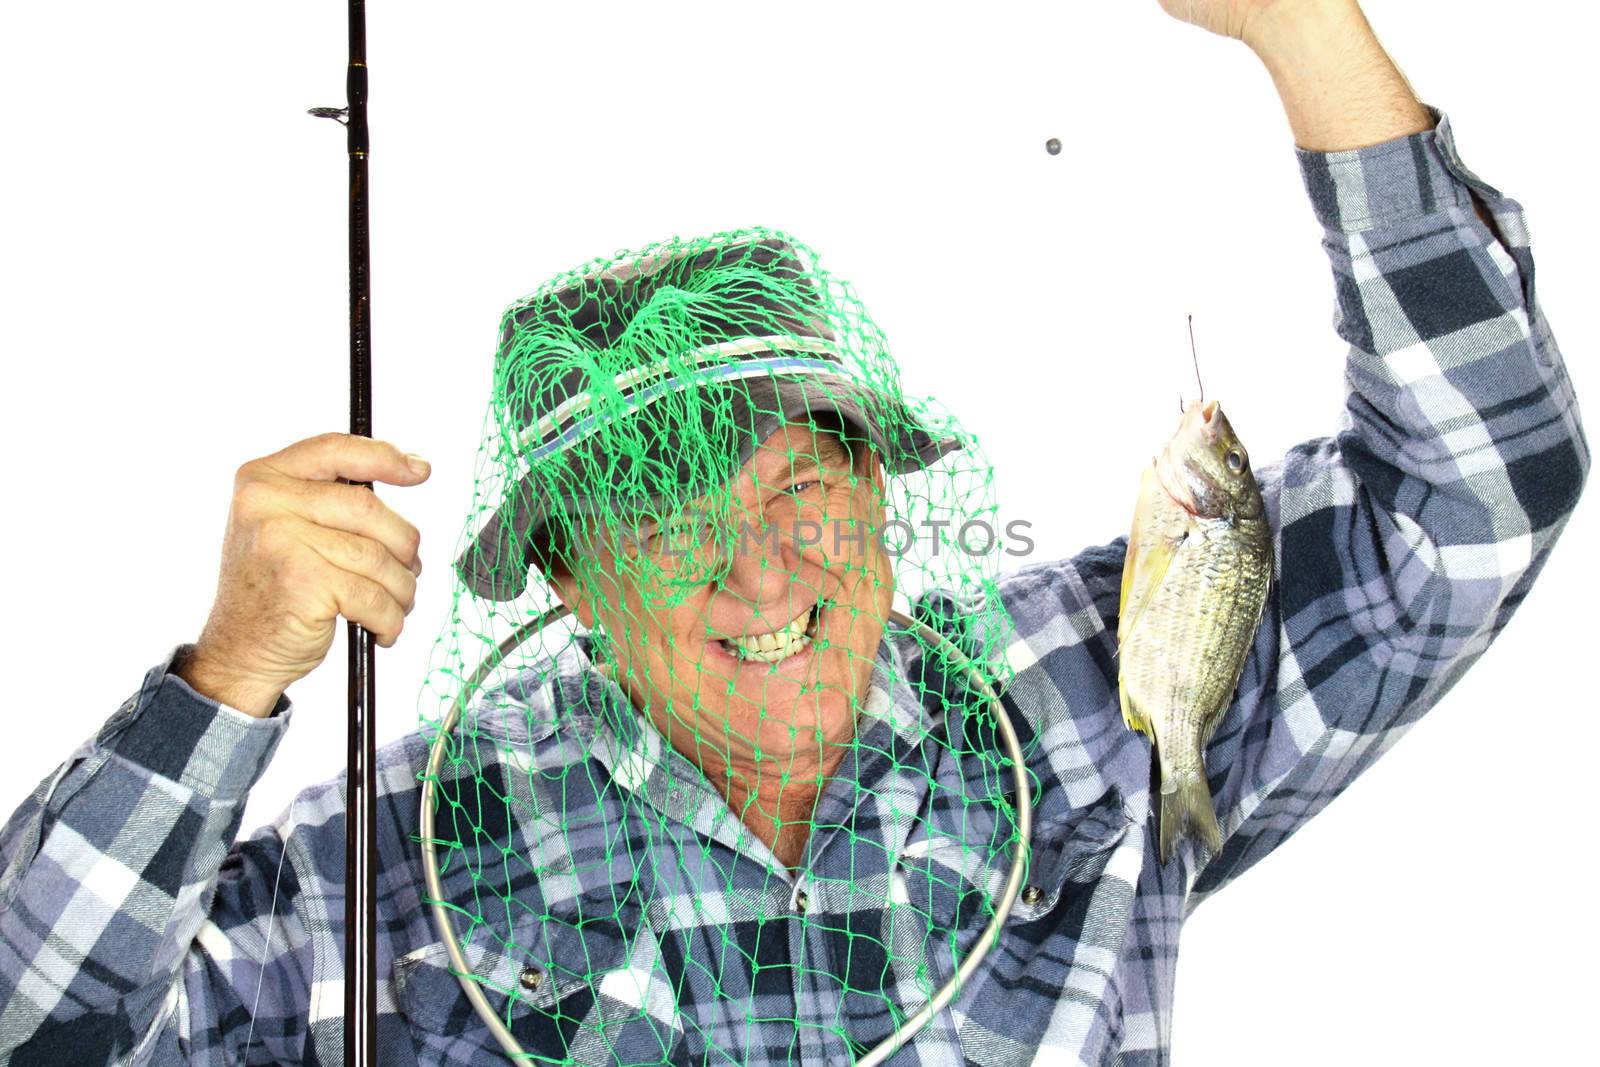 Middle aged fisherman ends up with fishing net over his head trying to catch a fish.